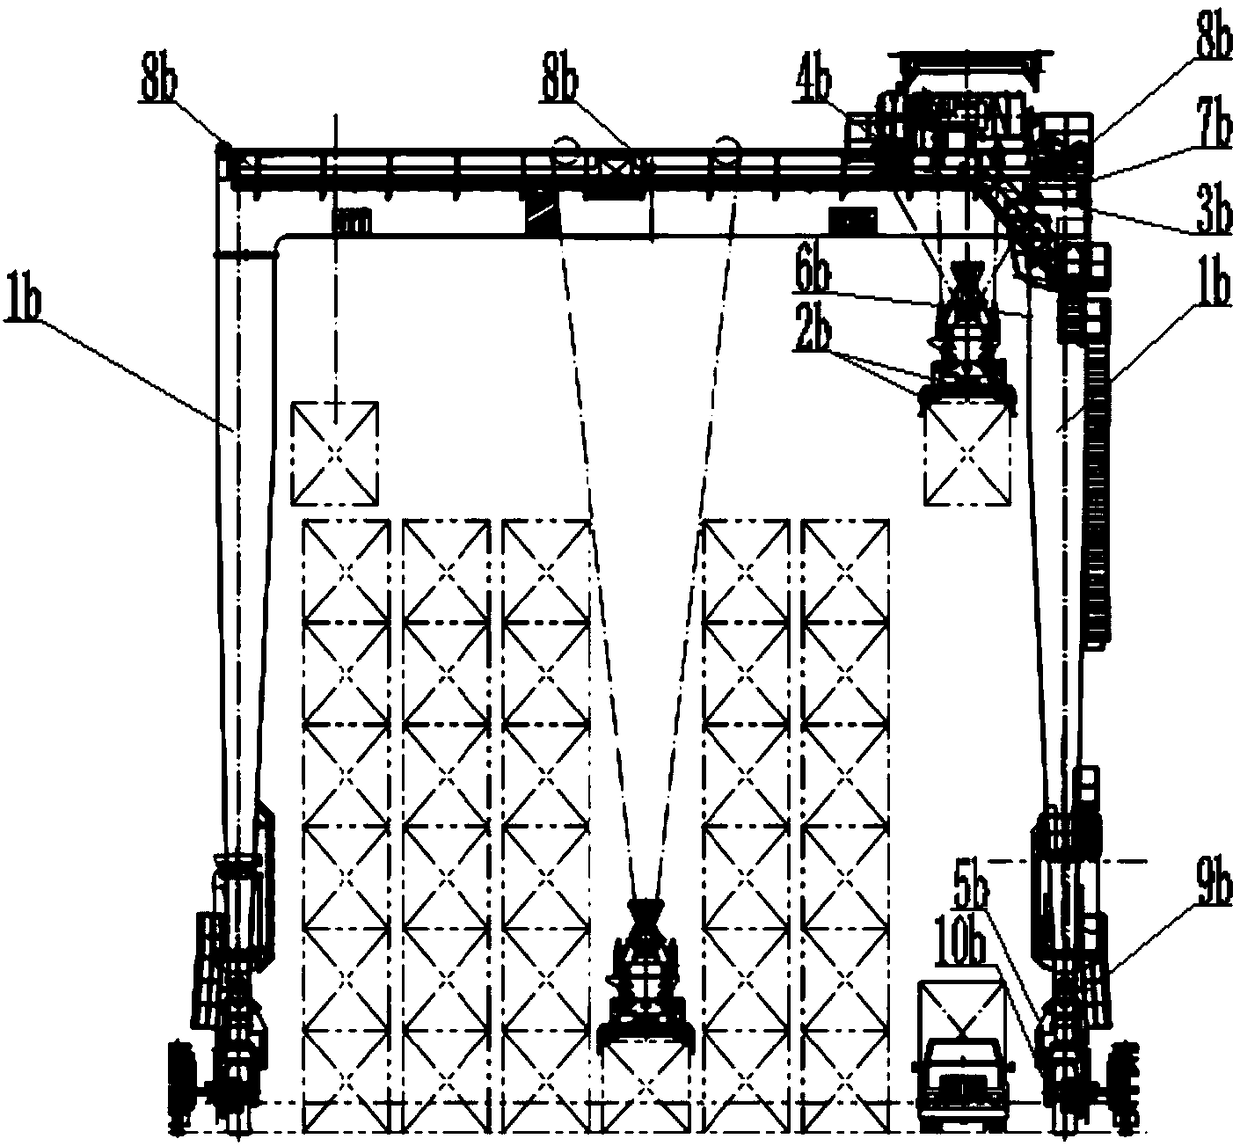 Remote control operation system for rubber-type container gantry crane loading and unloading operation